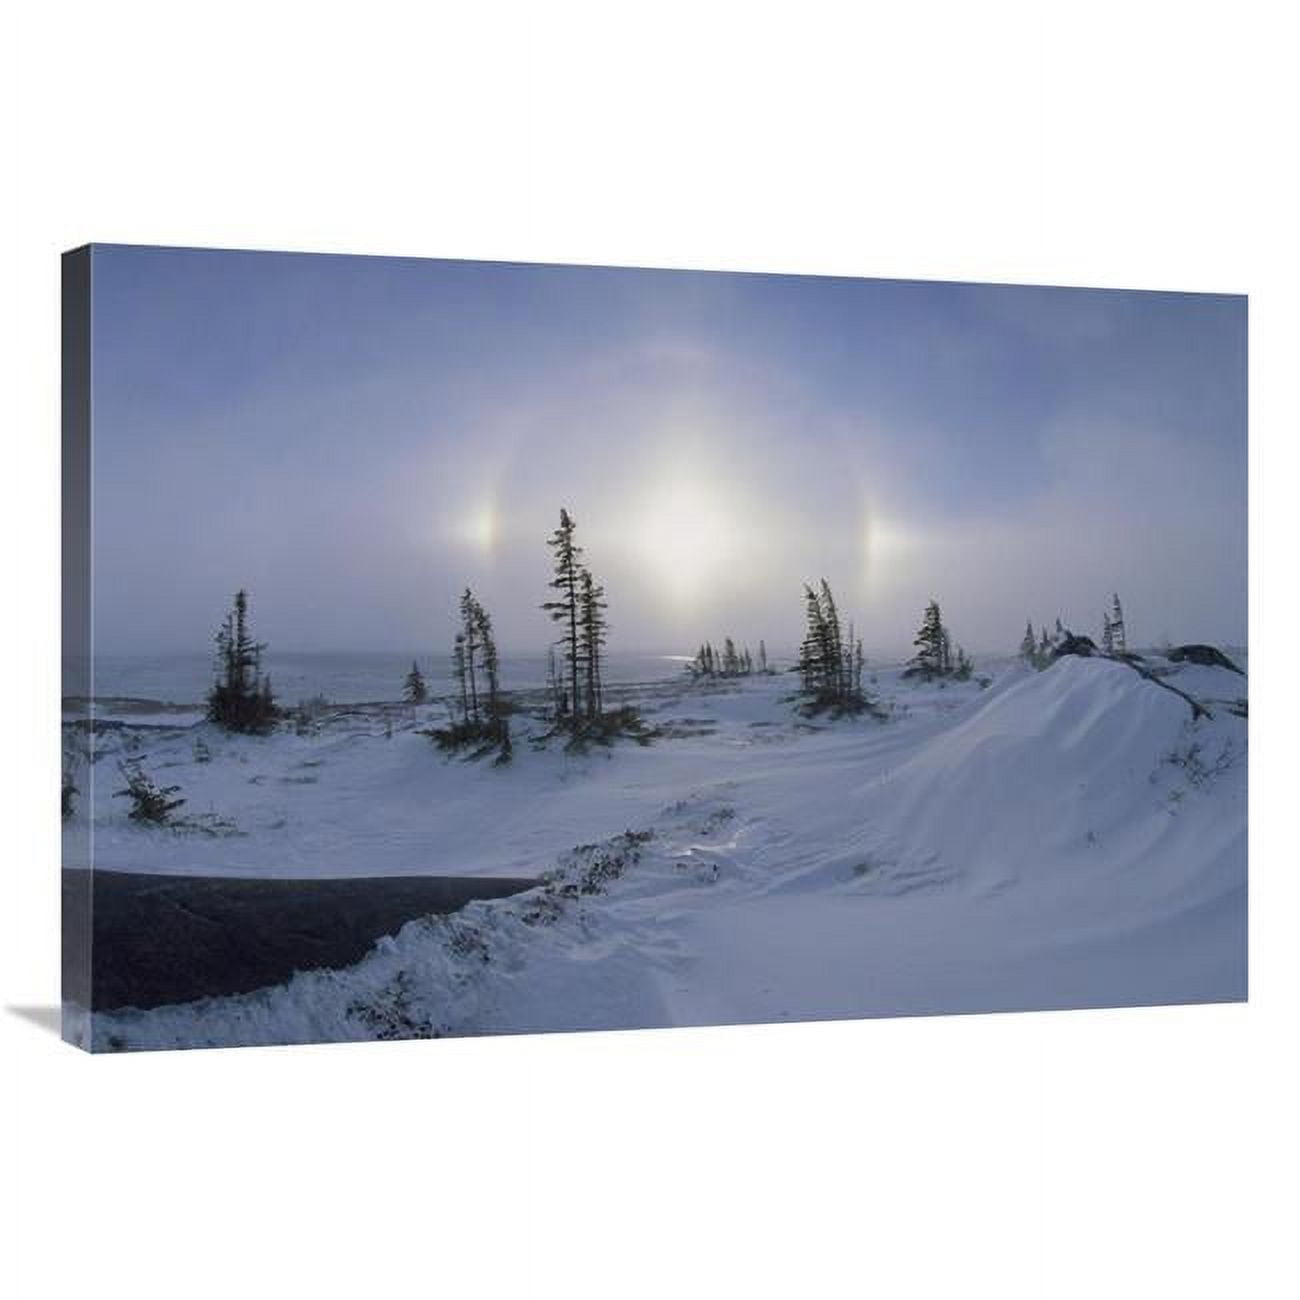 JensenDistributionServices 24 x 36 in. Spruce Forest in Snow with Sundogs, Hudson Bay, Canada Art Print - Konrad Wothe